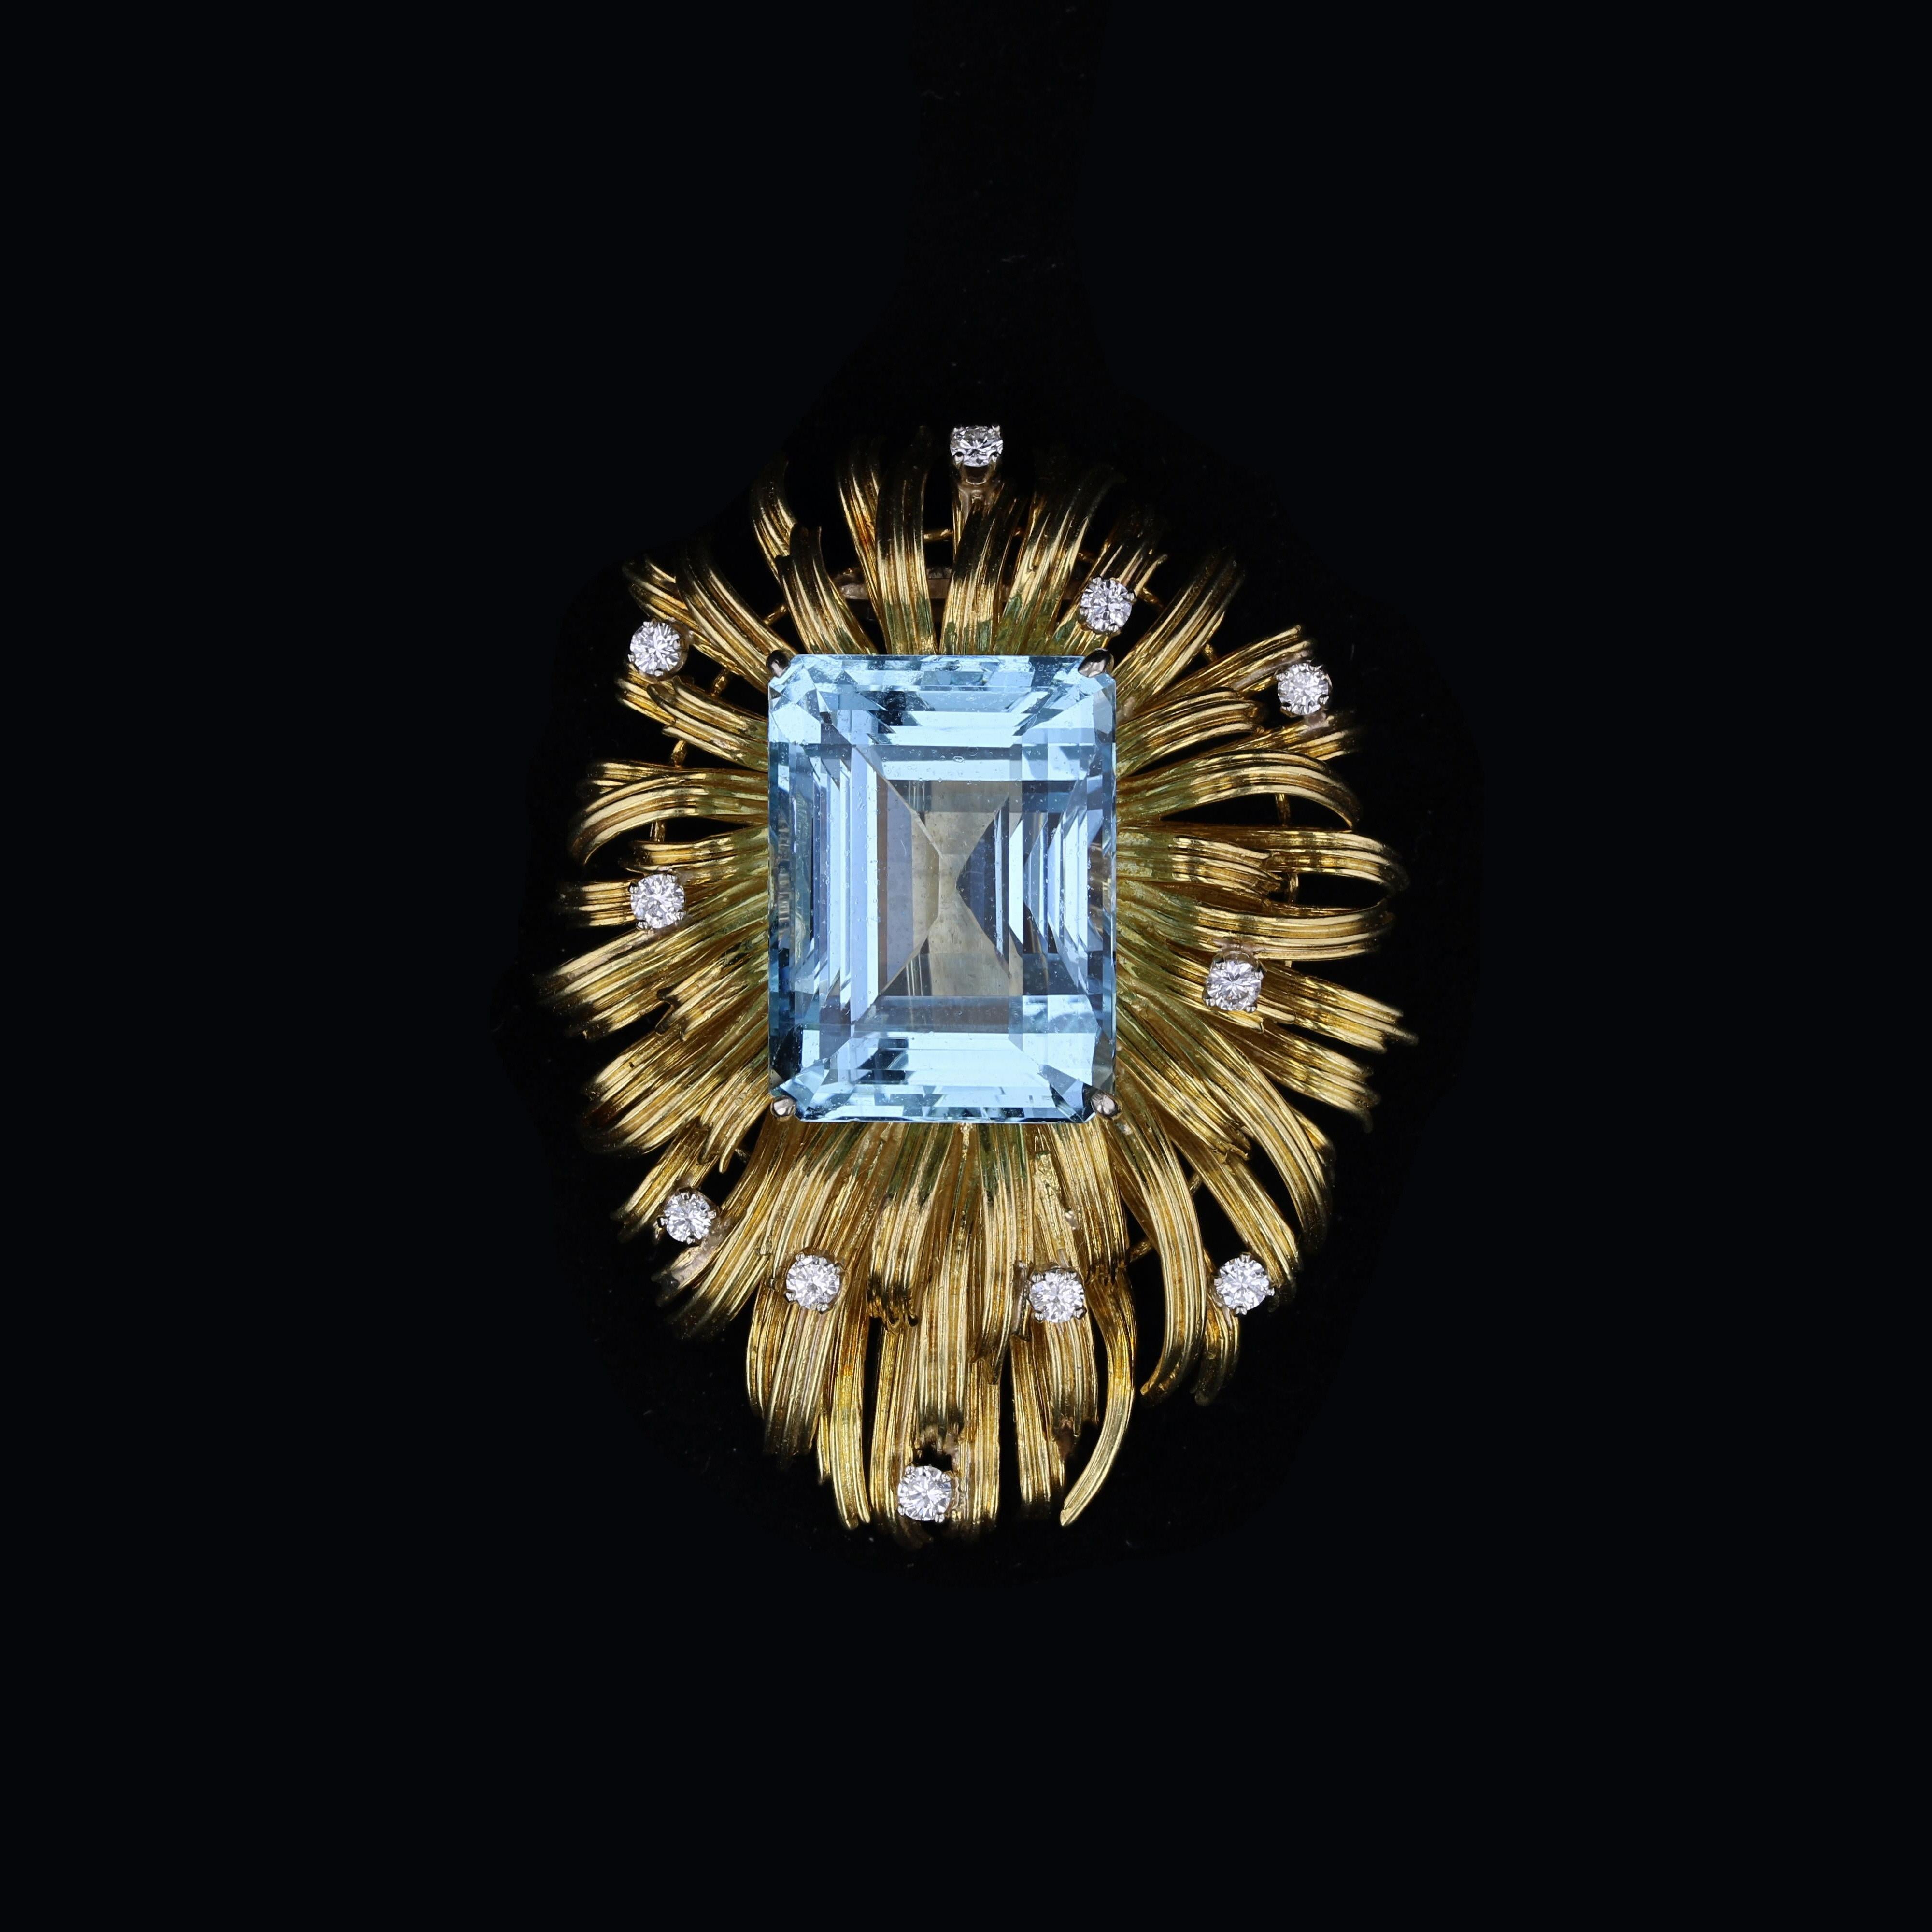 This vibrant 18K yellow gold brooch is centered with an emerald-cut aquamarine weighing in at 10.00 carats. The brooch features a large hidden bail on the reverse side, so the piece can also be worn as a pendant. 

The aquamarine is accented by a